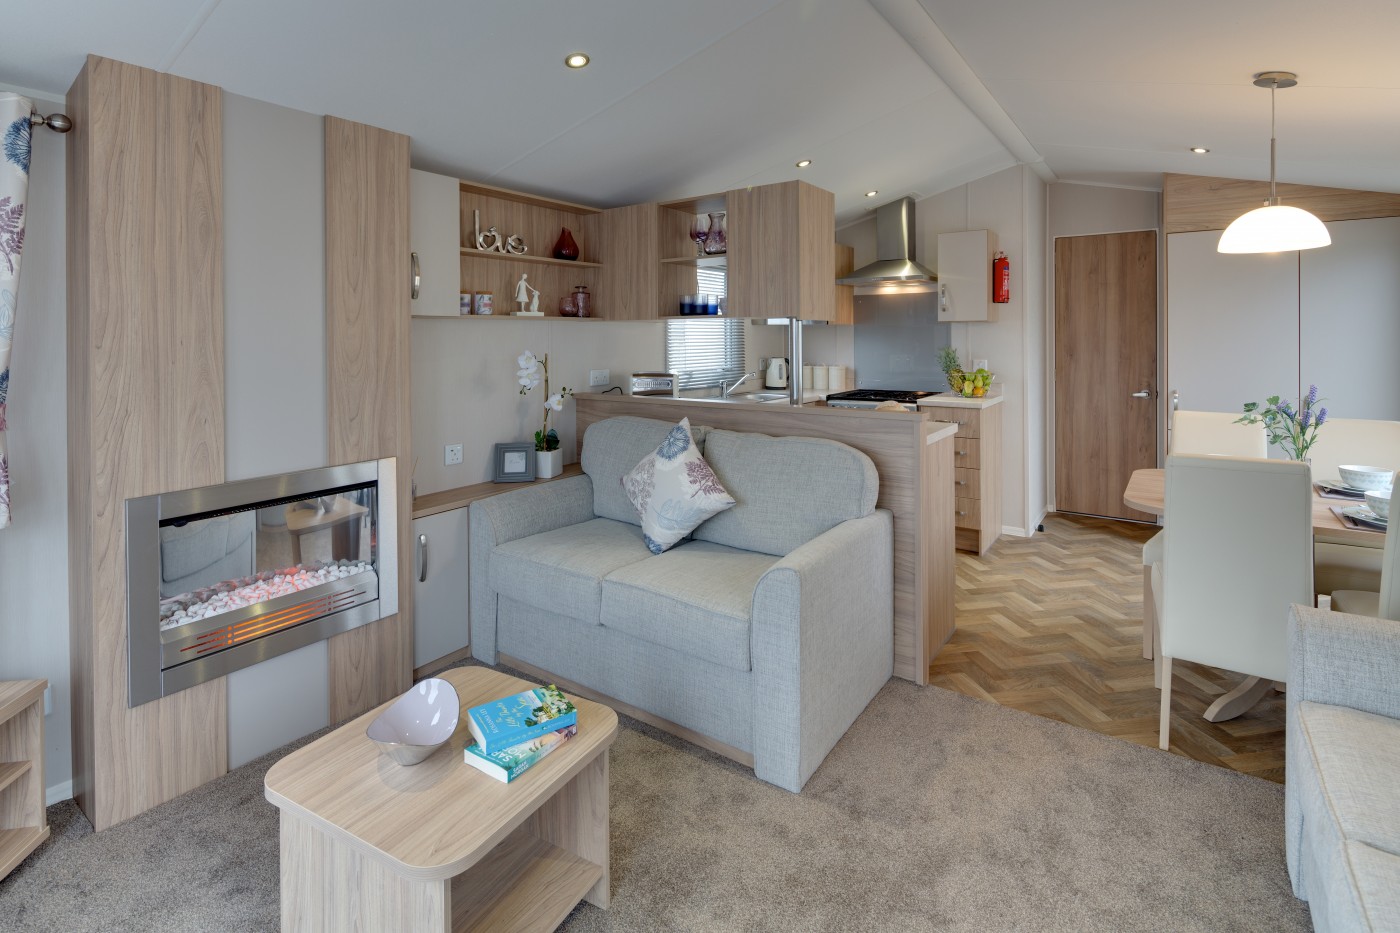 The 2018 Willerby Brockenhurst is close to the River Tummel and is south facing. It has three bedrooms and an open plan kitchen/living room layout. Bedroom 1 – Double, Bedroom 2 – Twin, Bedroom 3 - Twin. We do not supply sheets, towels and dish towels. This is a No Smoking Caravan